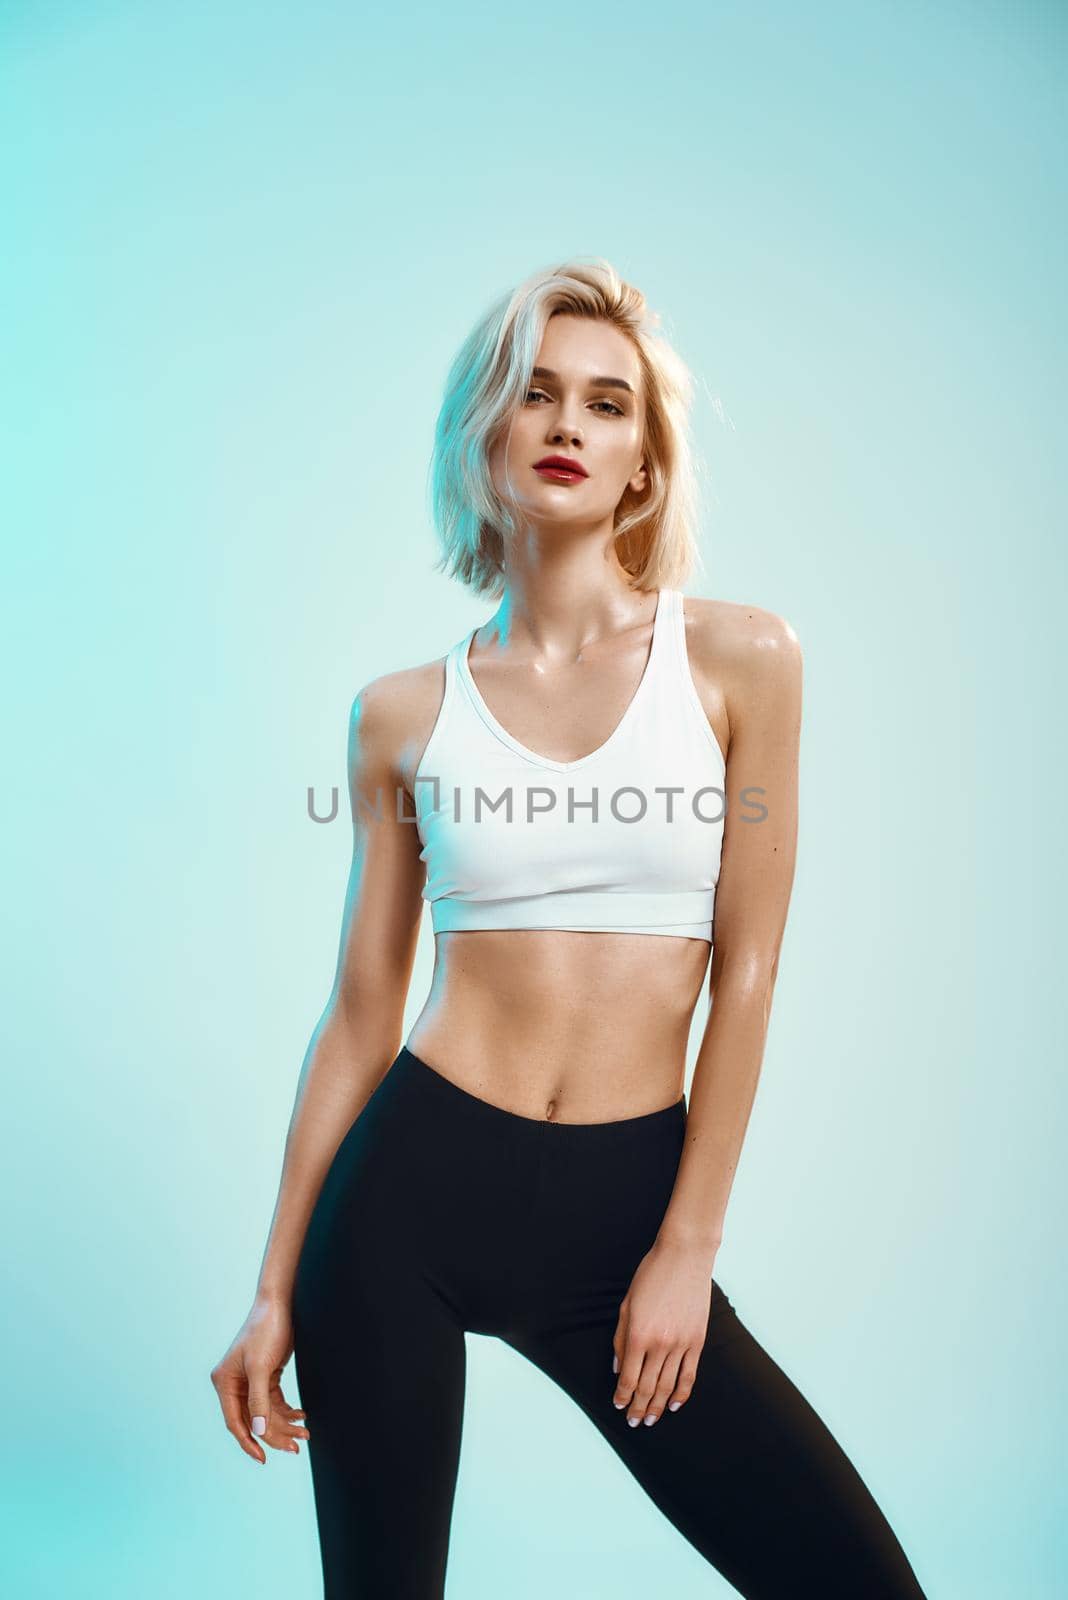 Beauty portrait. Sexy young woman in white top and black leggings looking at camera while standing against blue background in studio. Fashion concept. Sensuality. Studio shot